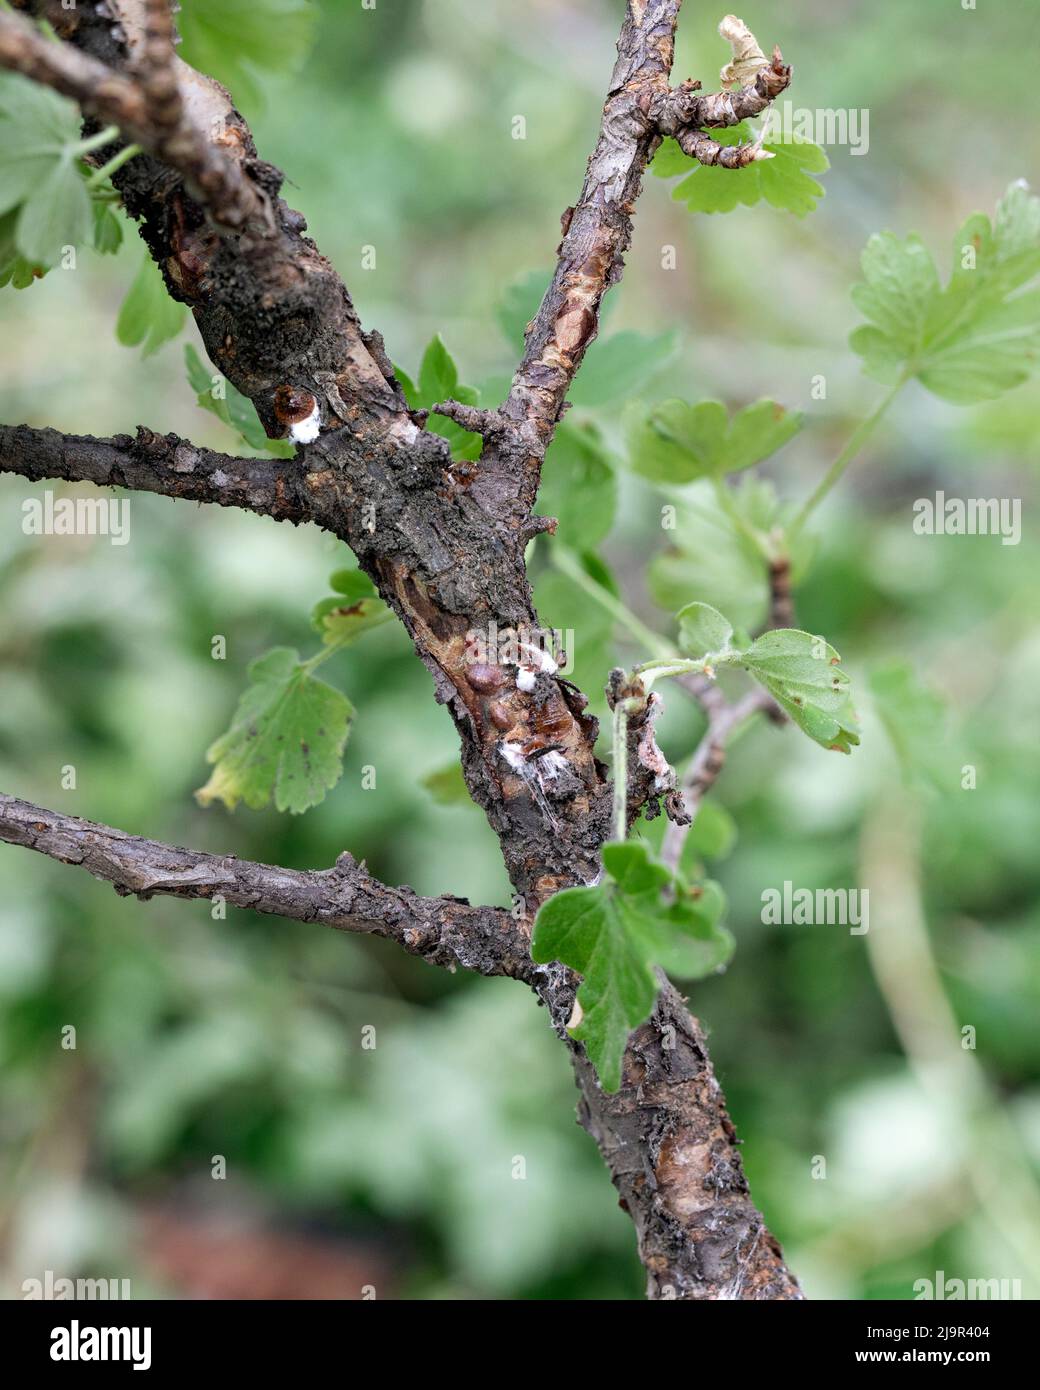 Plant stem heavily infested by scale insects coccoidea on natural background, selective focus Stock Photo